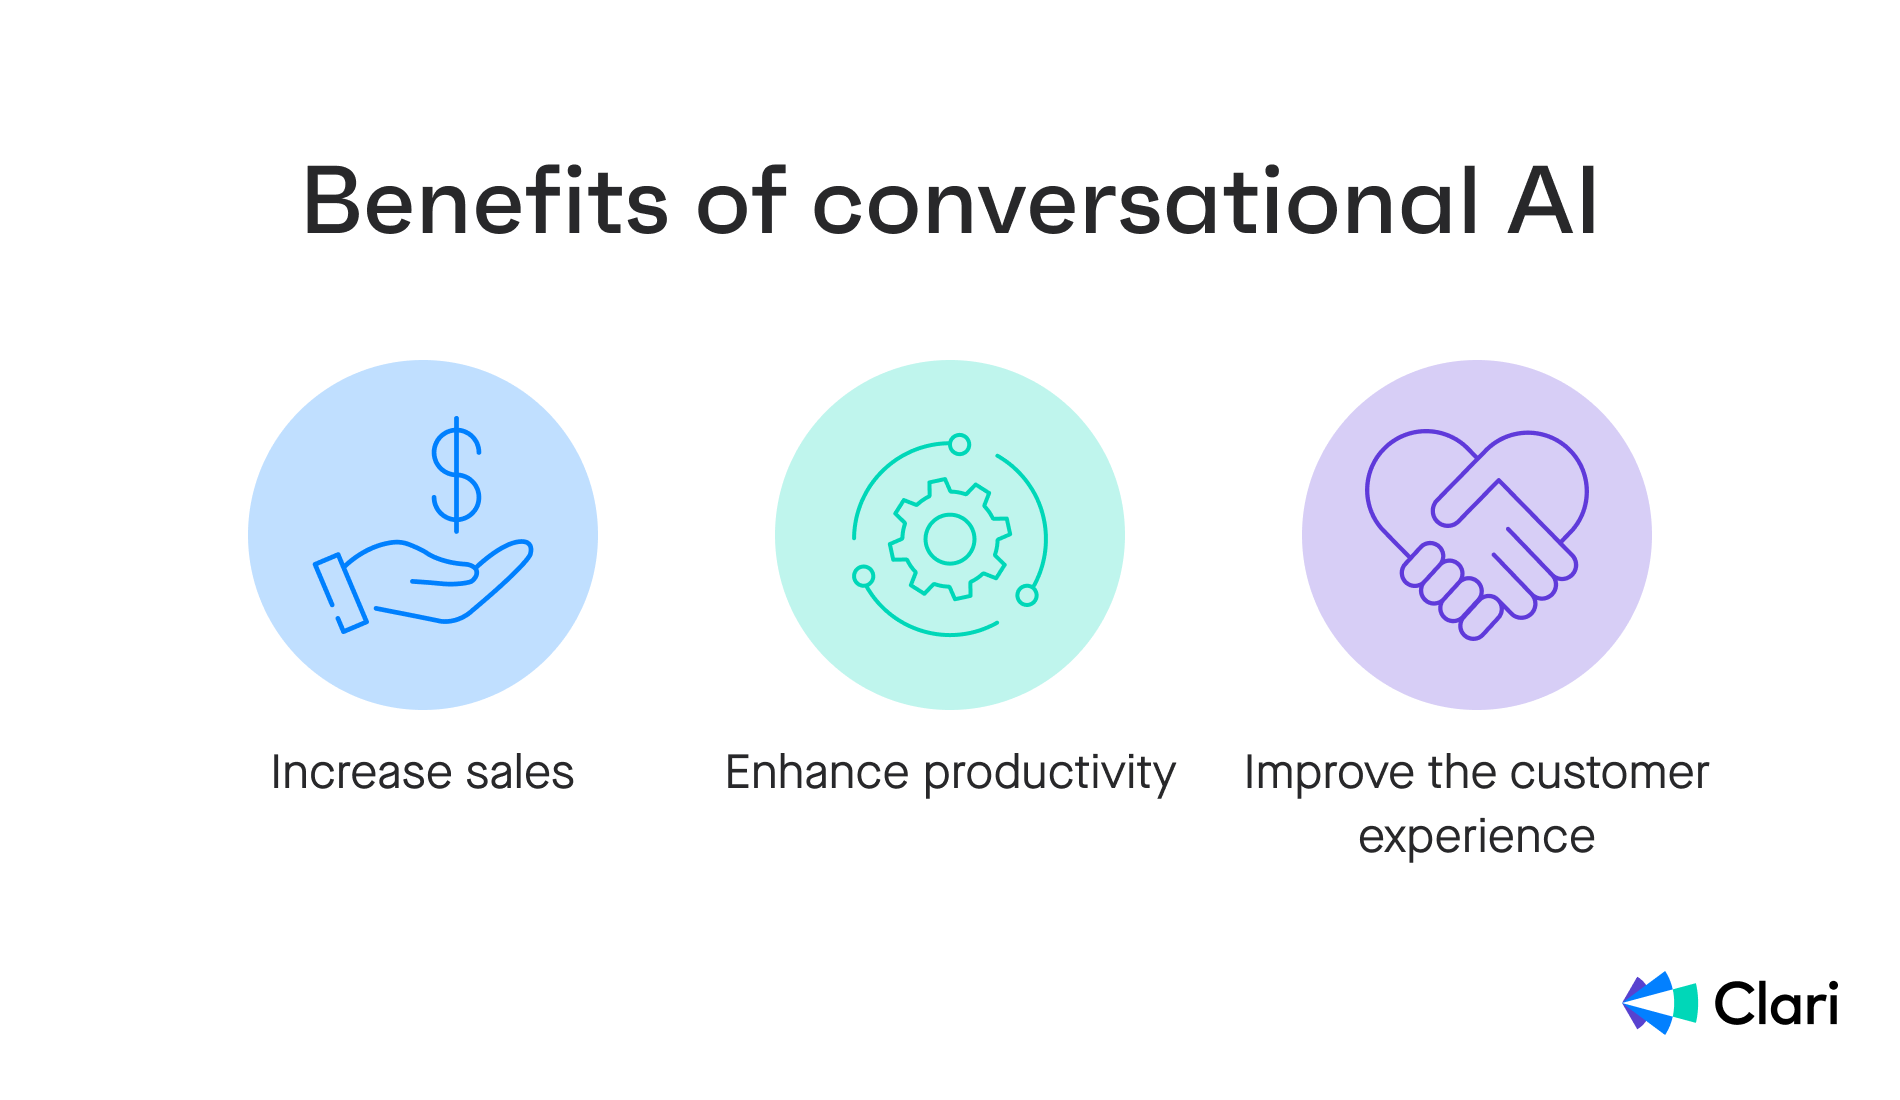 What are the benefits of conversational AI?